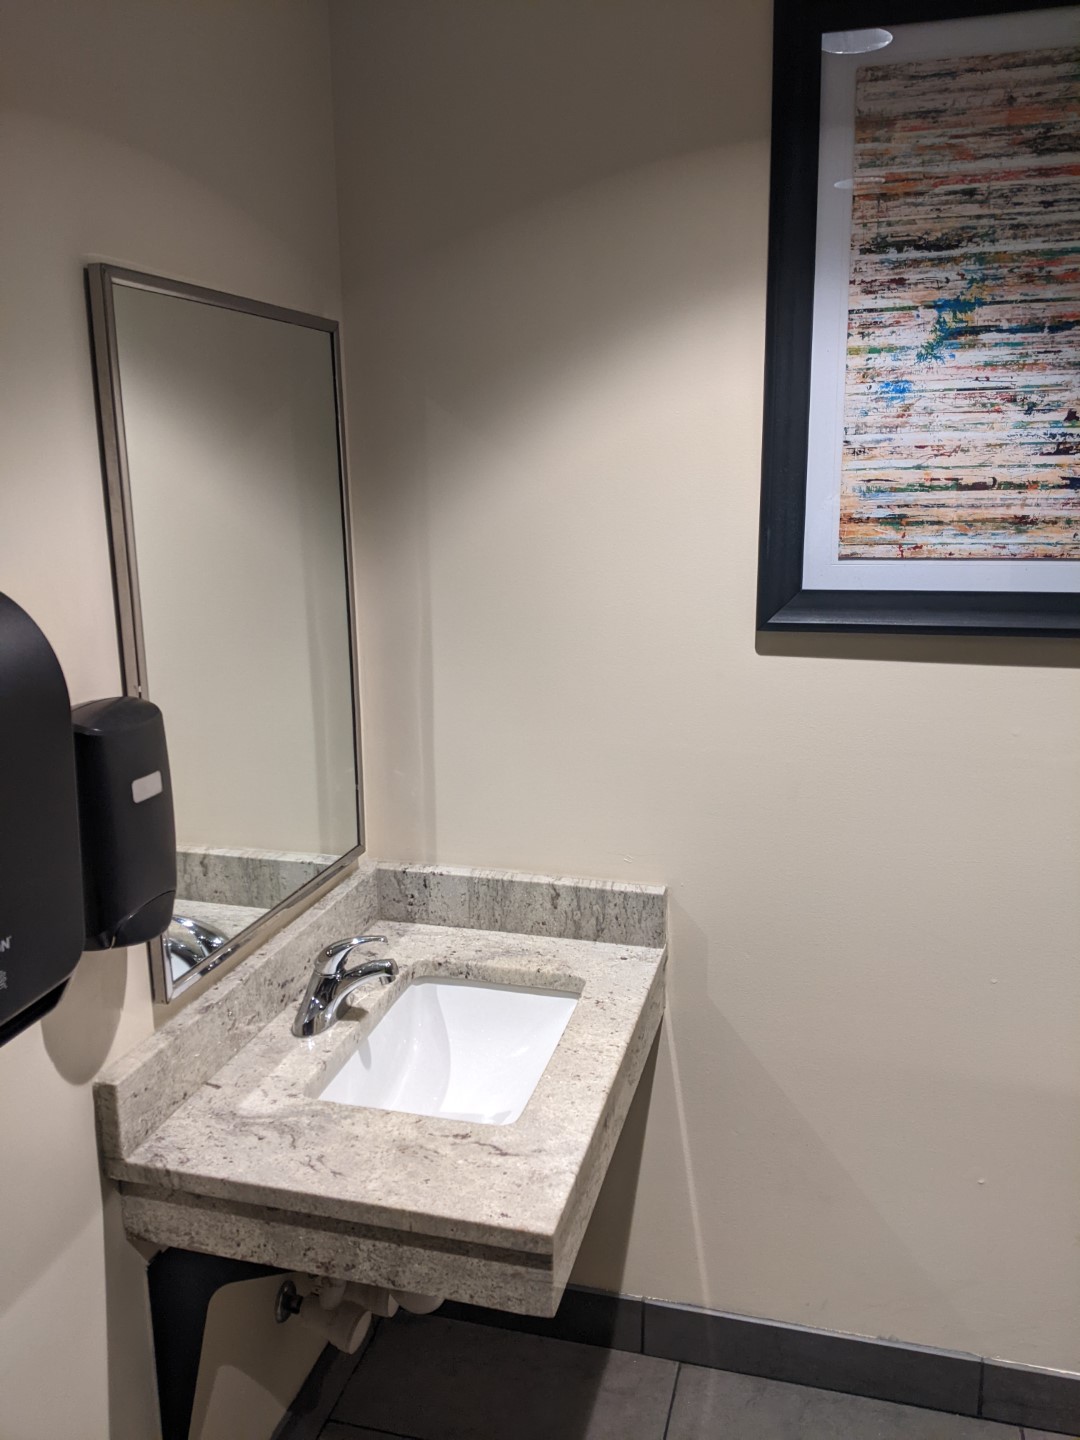 A marble sink with a white basin. It's attached to a beige wall and there's a mirror over it. A piece of artwork in a black frame hangs on the adjacent wall.